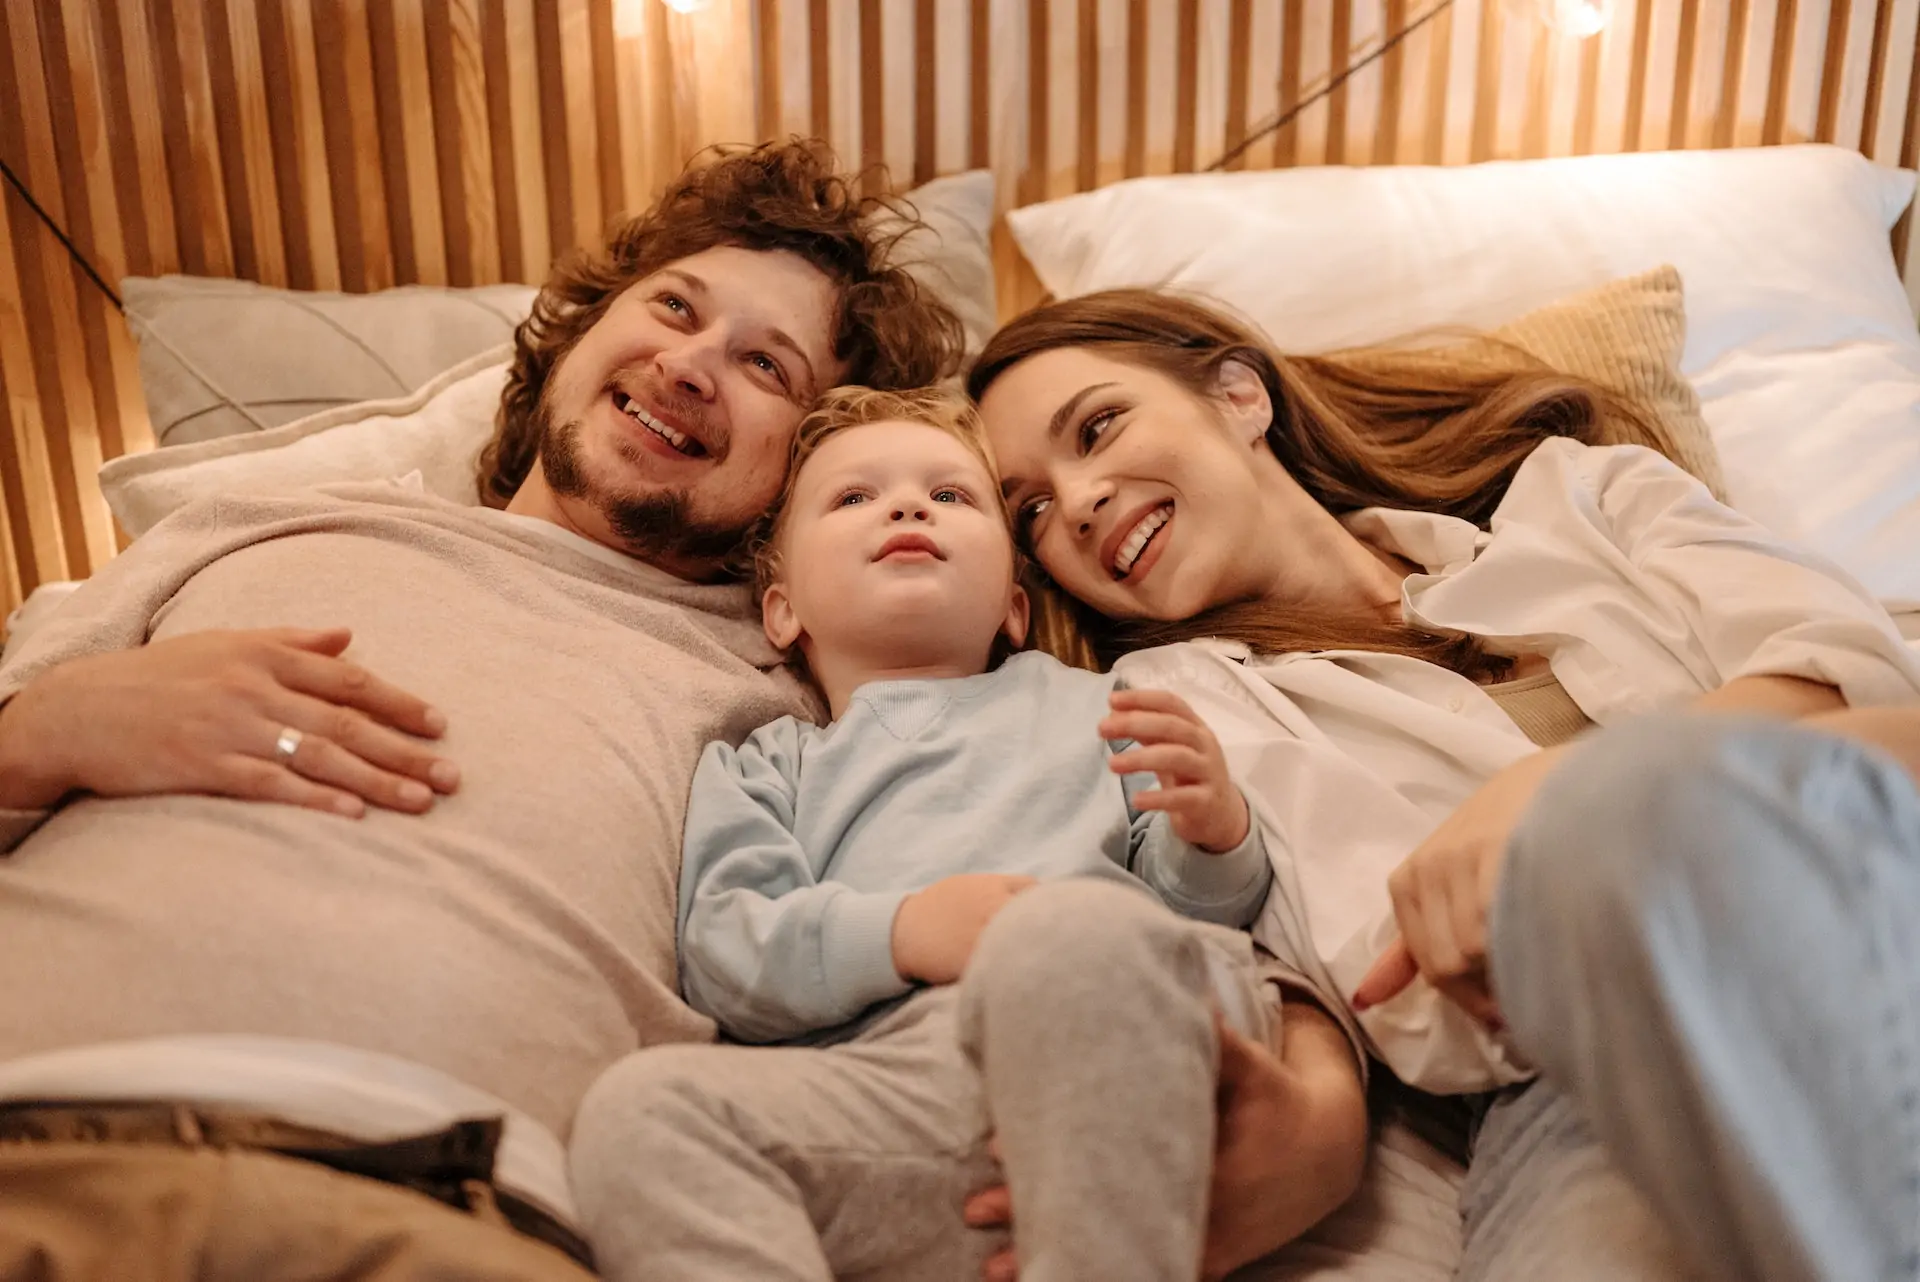 Family in bed together smiling.